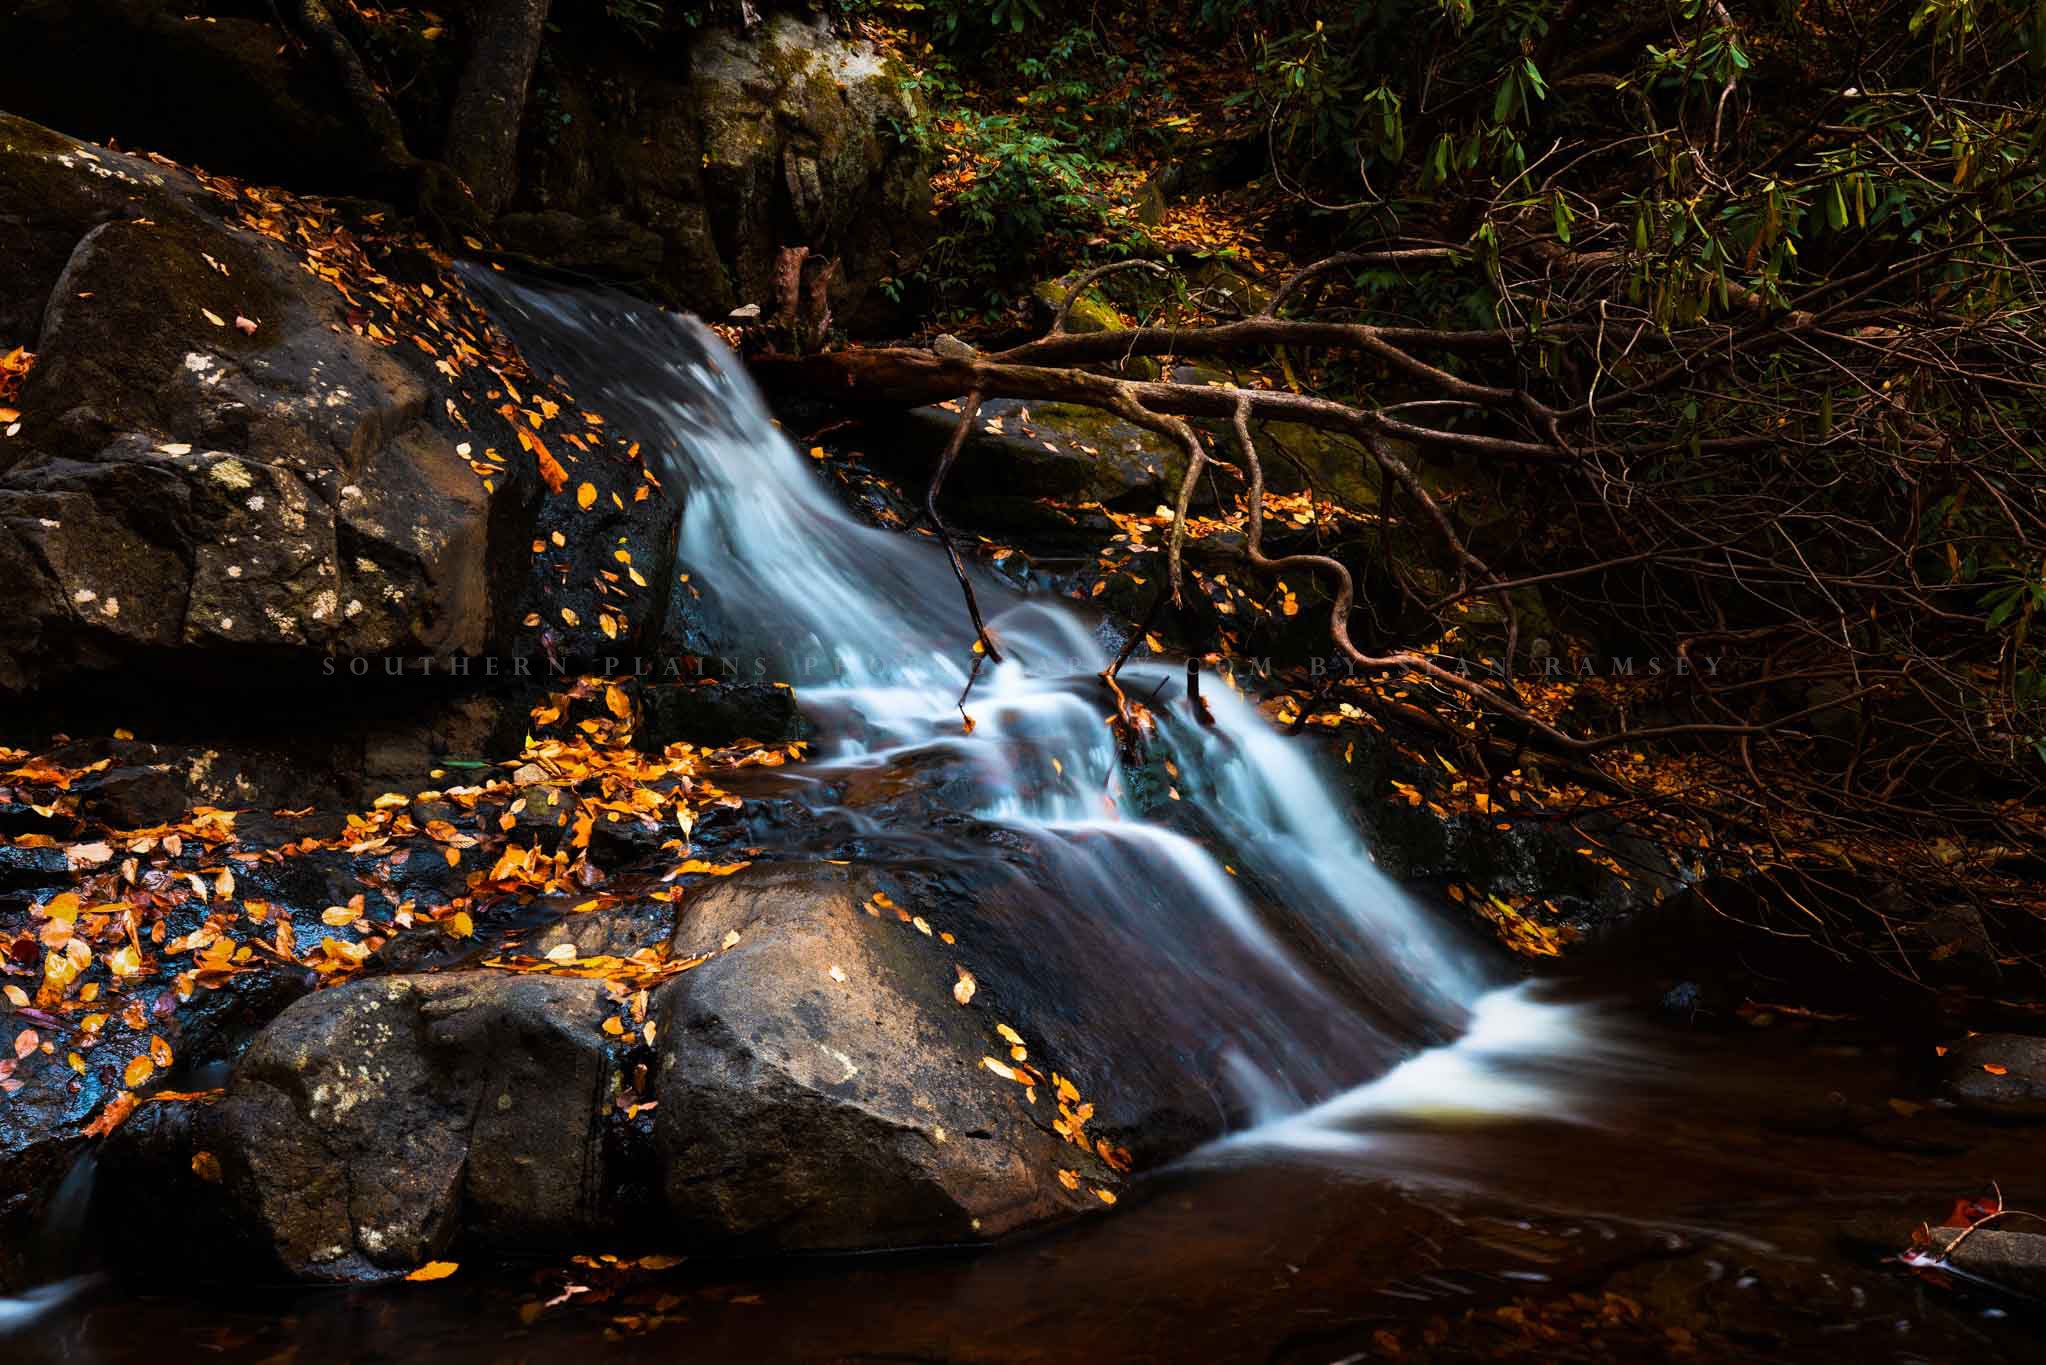 Waterfall photography print of Laurel Falls adorned with golden leaves on an autumn day in Great Smoky Mountains National Park by Sean Ramsey of Southern Plains Photography.